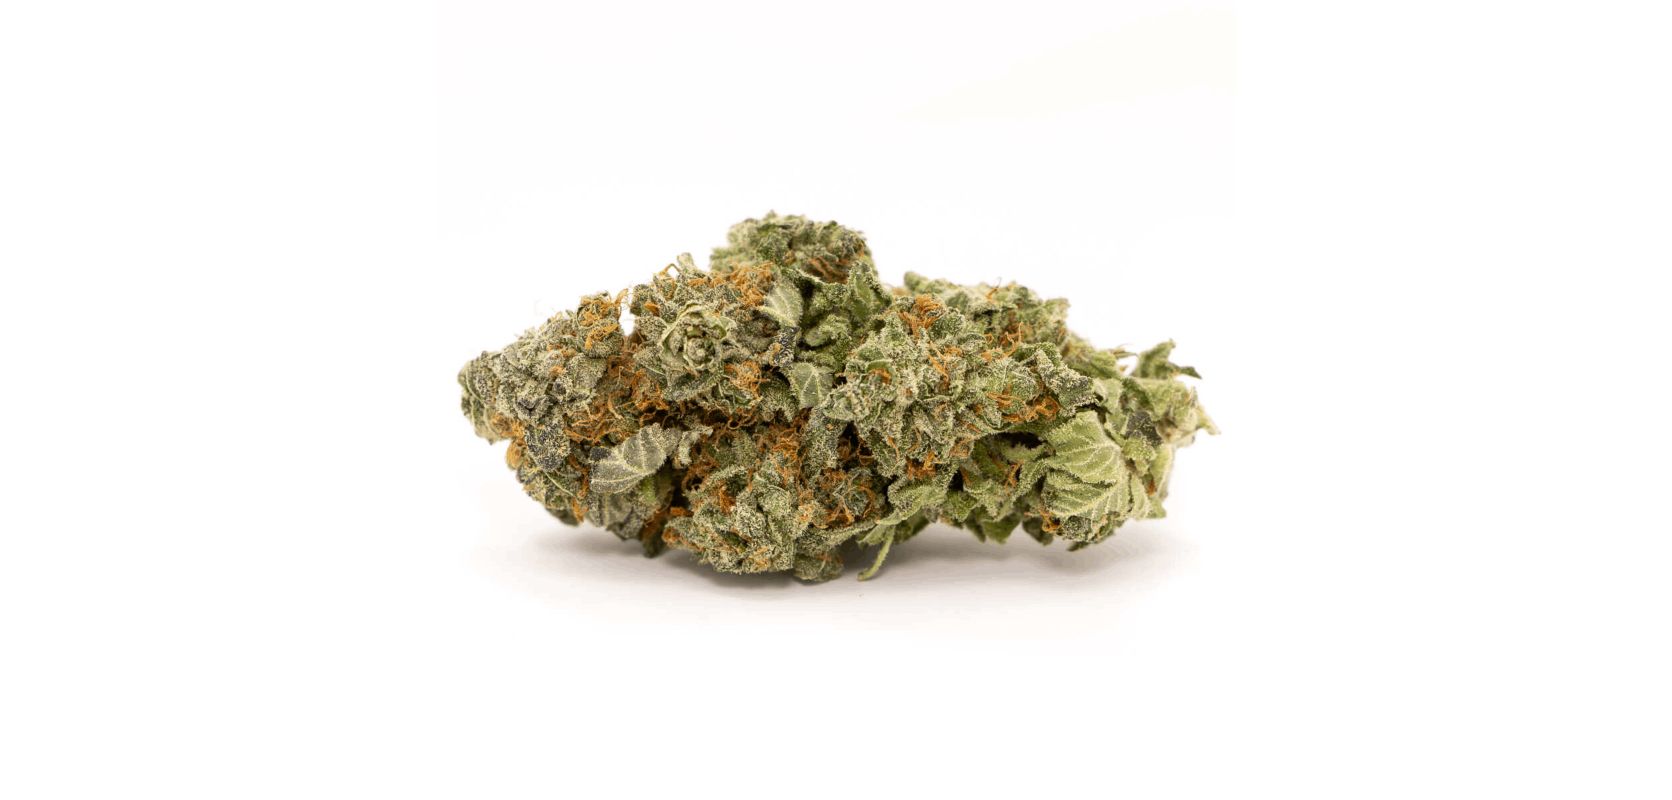 As mentioned the Bruce Banner weed strain provides users with around 24 to 29 percent THC. 